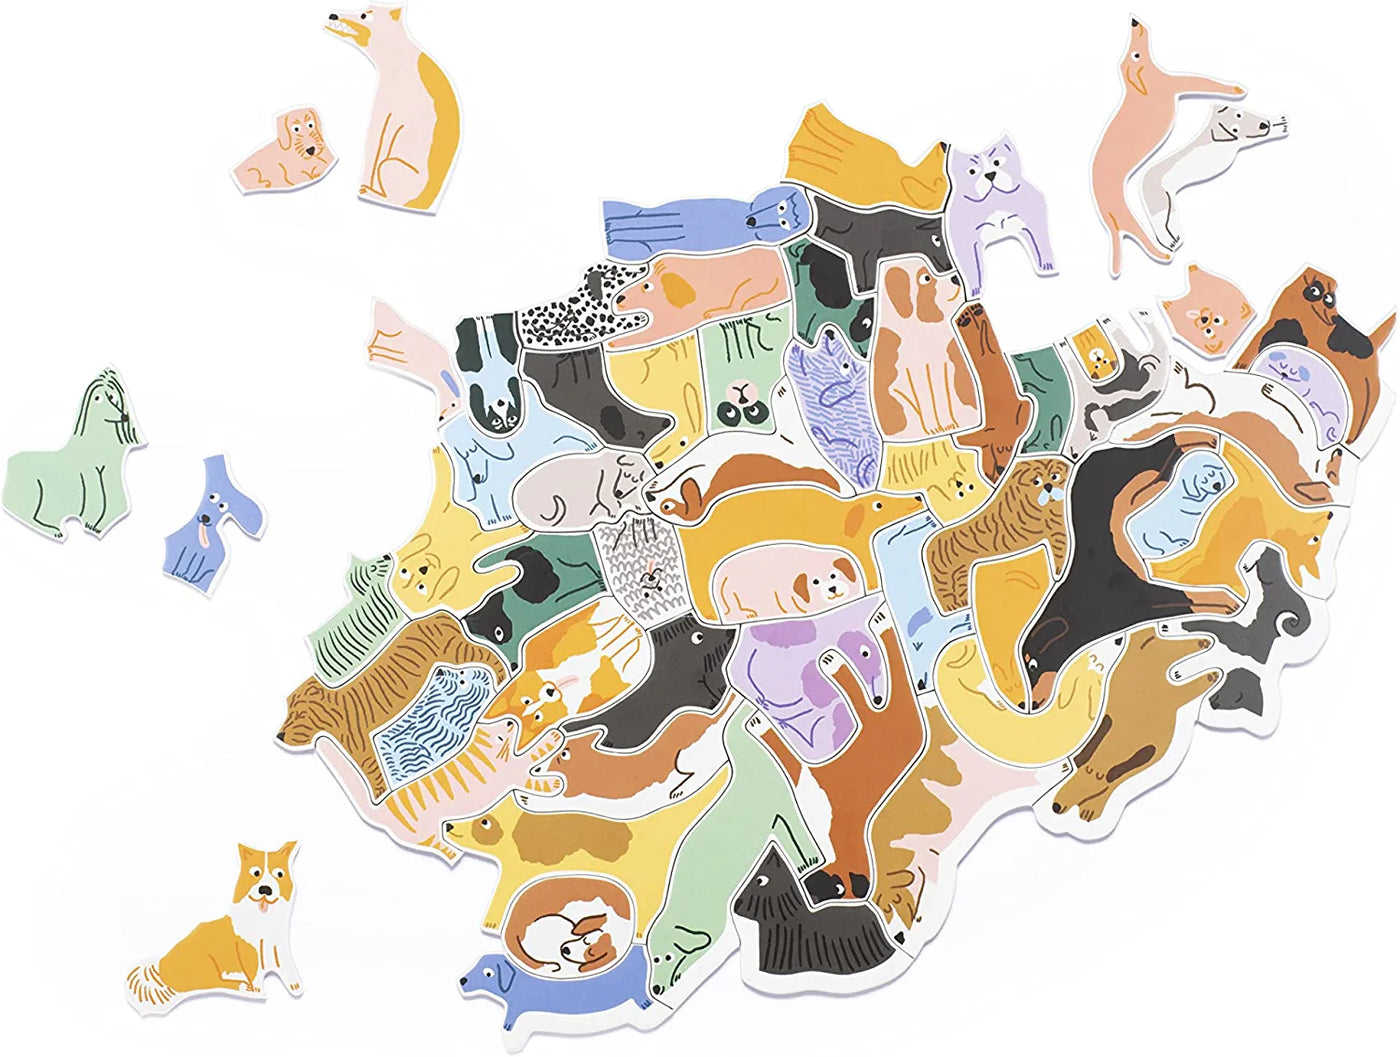 299 Dogs (and a Cat) | 300 Piece Jigsaw Puzzle